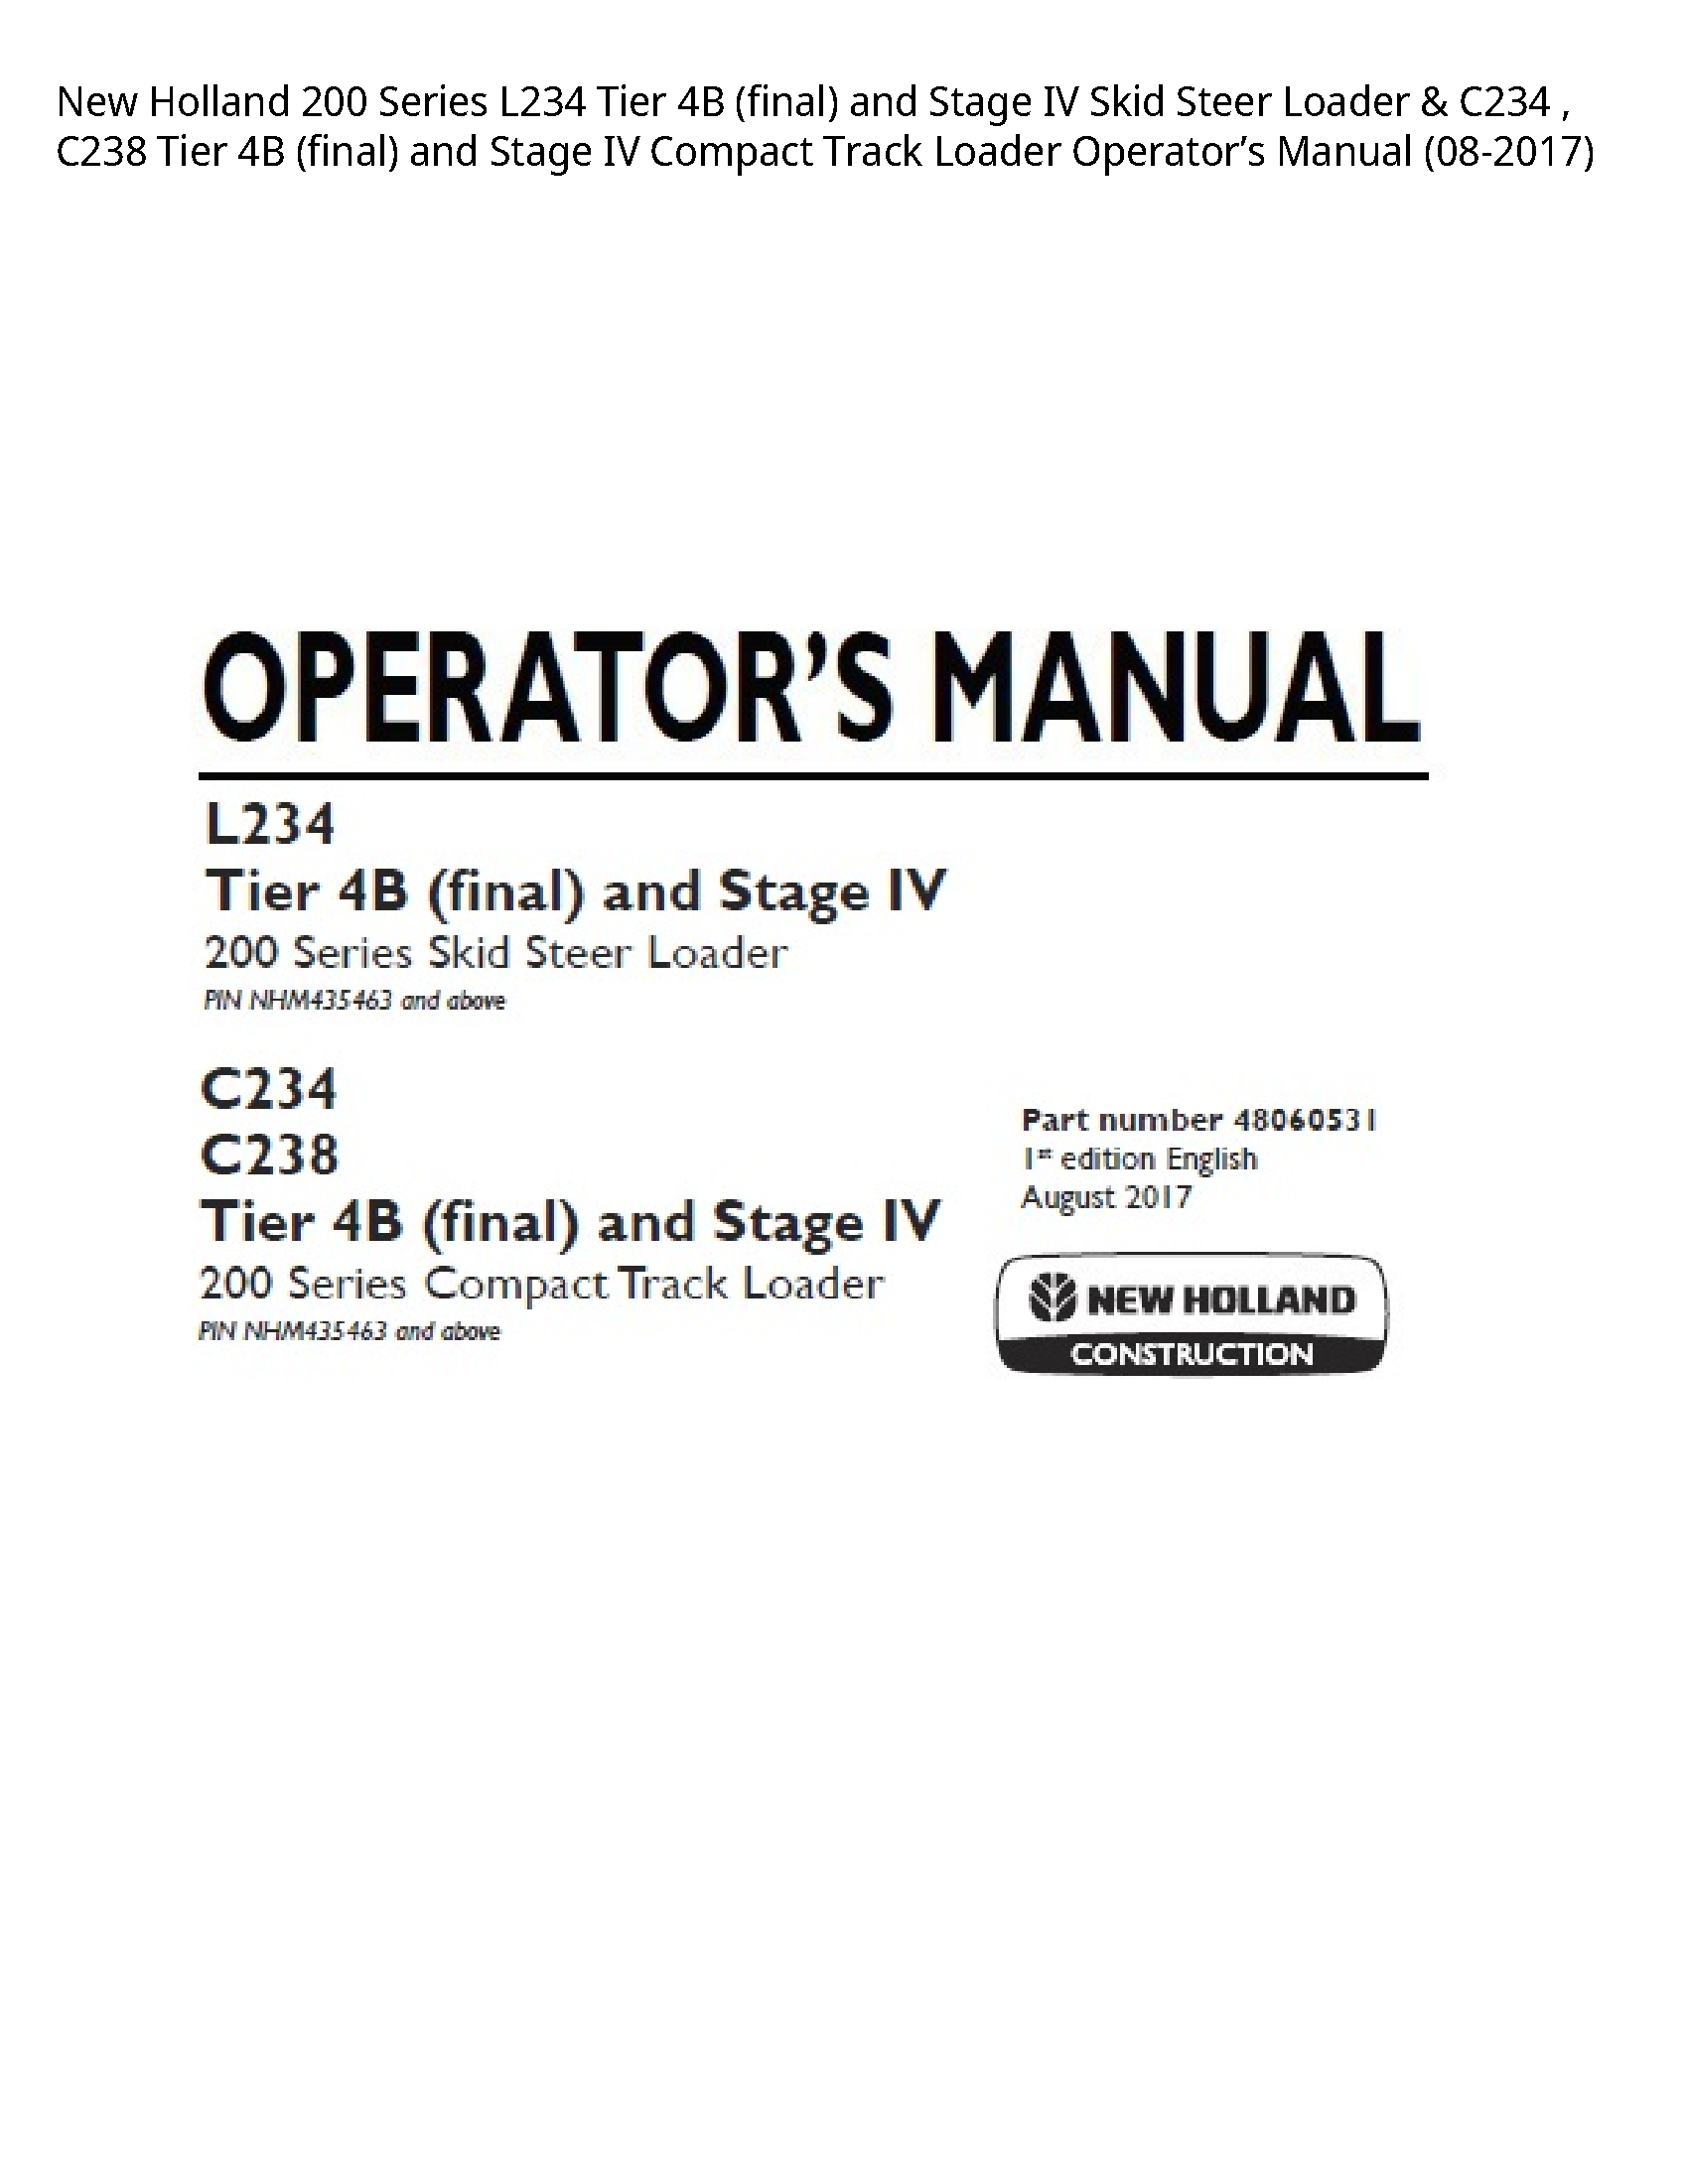 New Holland 200 Series Tier (final)  Stage IV Skid Steer Loader Tier (final)  Stage IV Compact Track Loader Operator’s manual